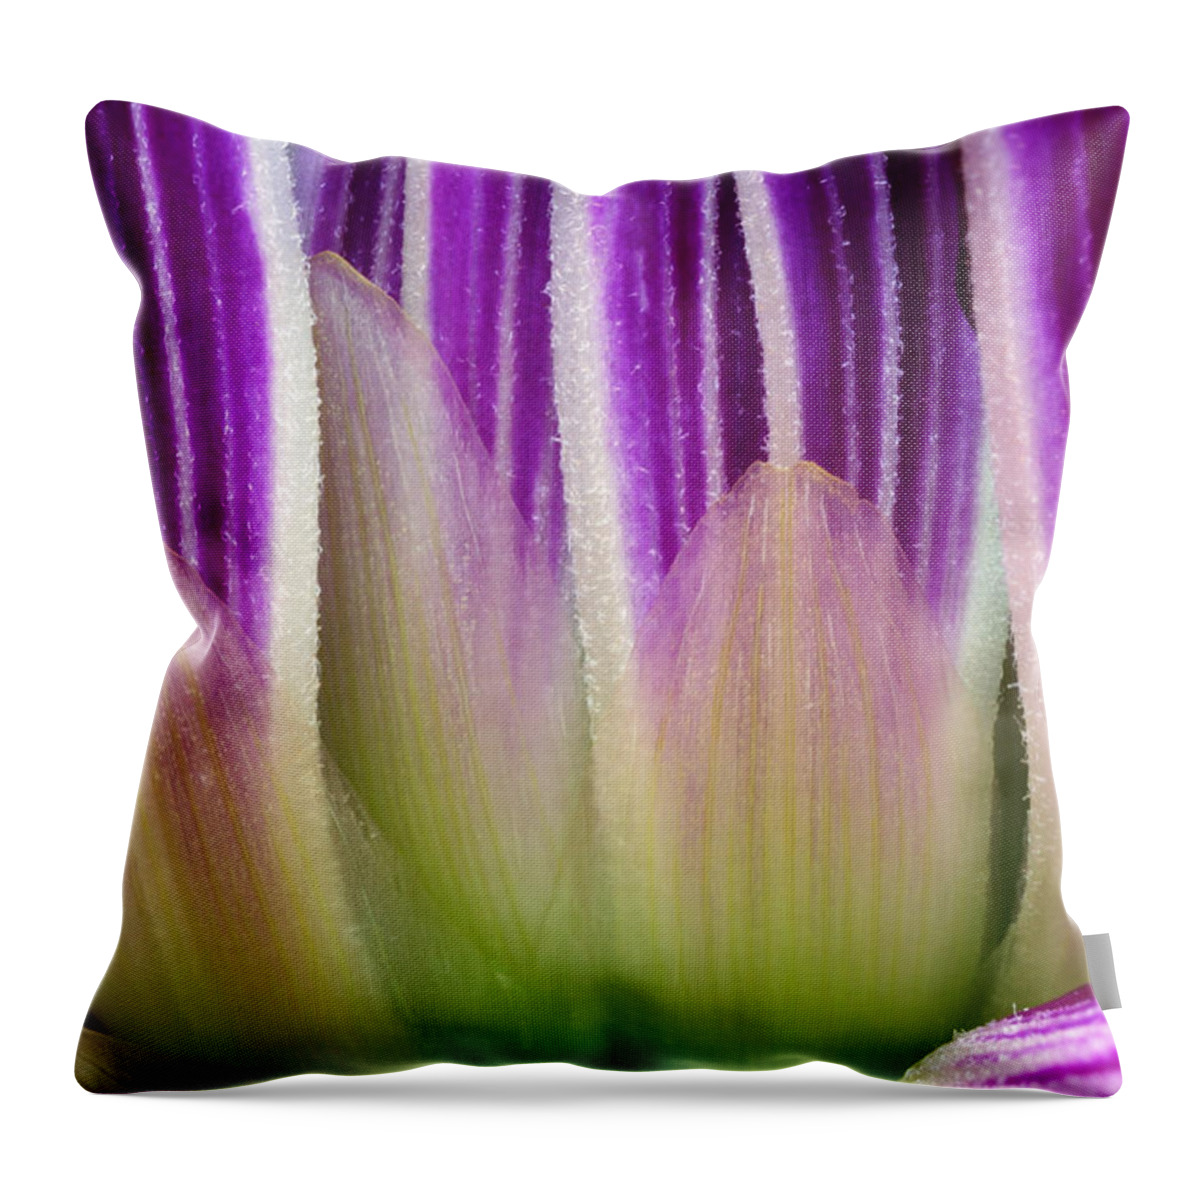 Just A Dahlia 1 Throw Pillow featuring the photograph Just A Dahlia 1 by Wendy Wilton